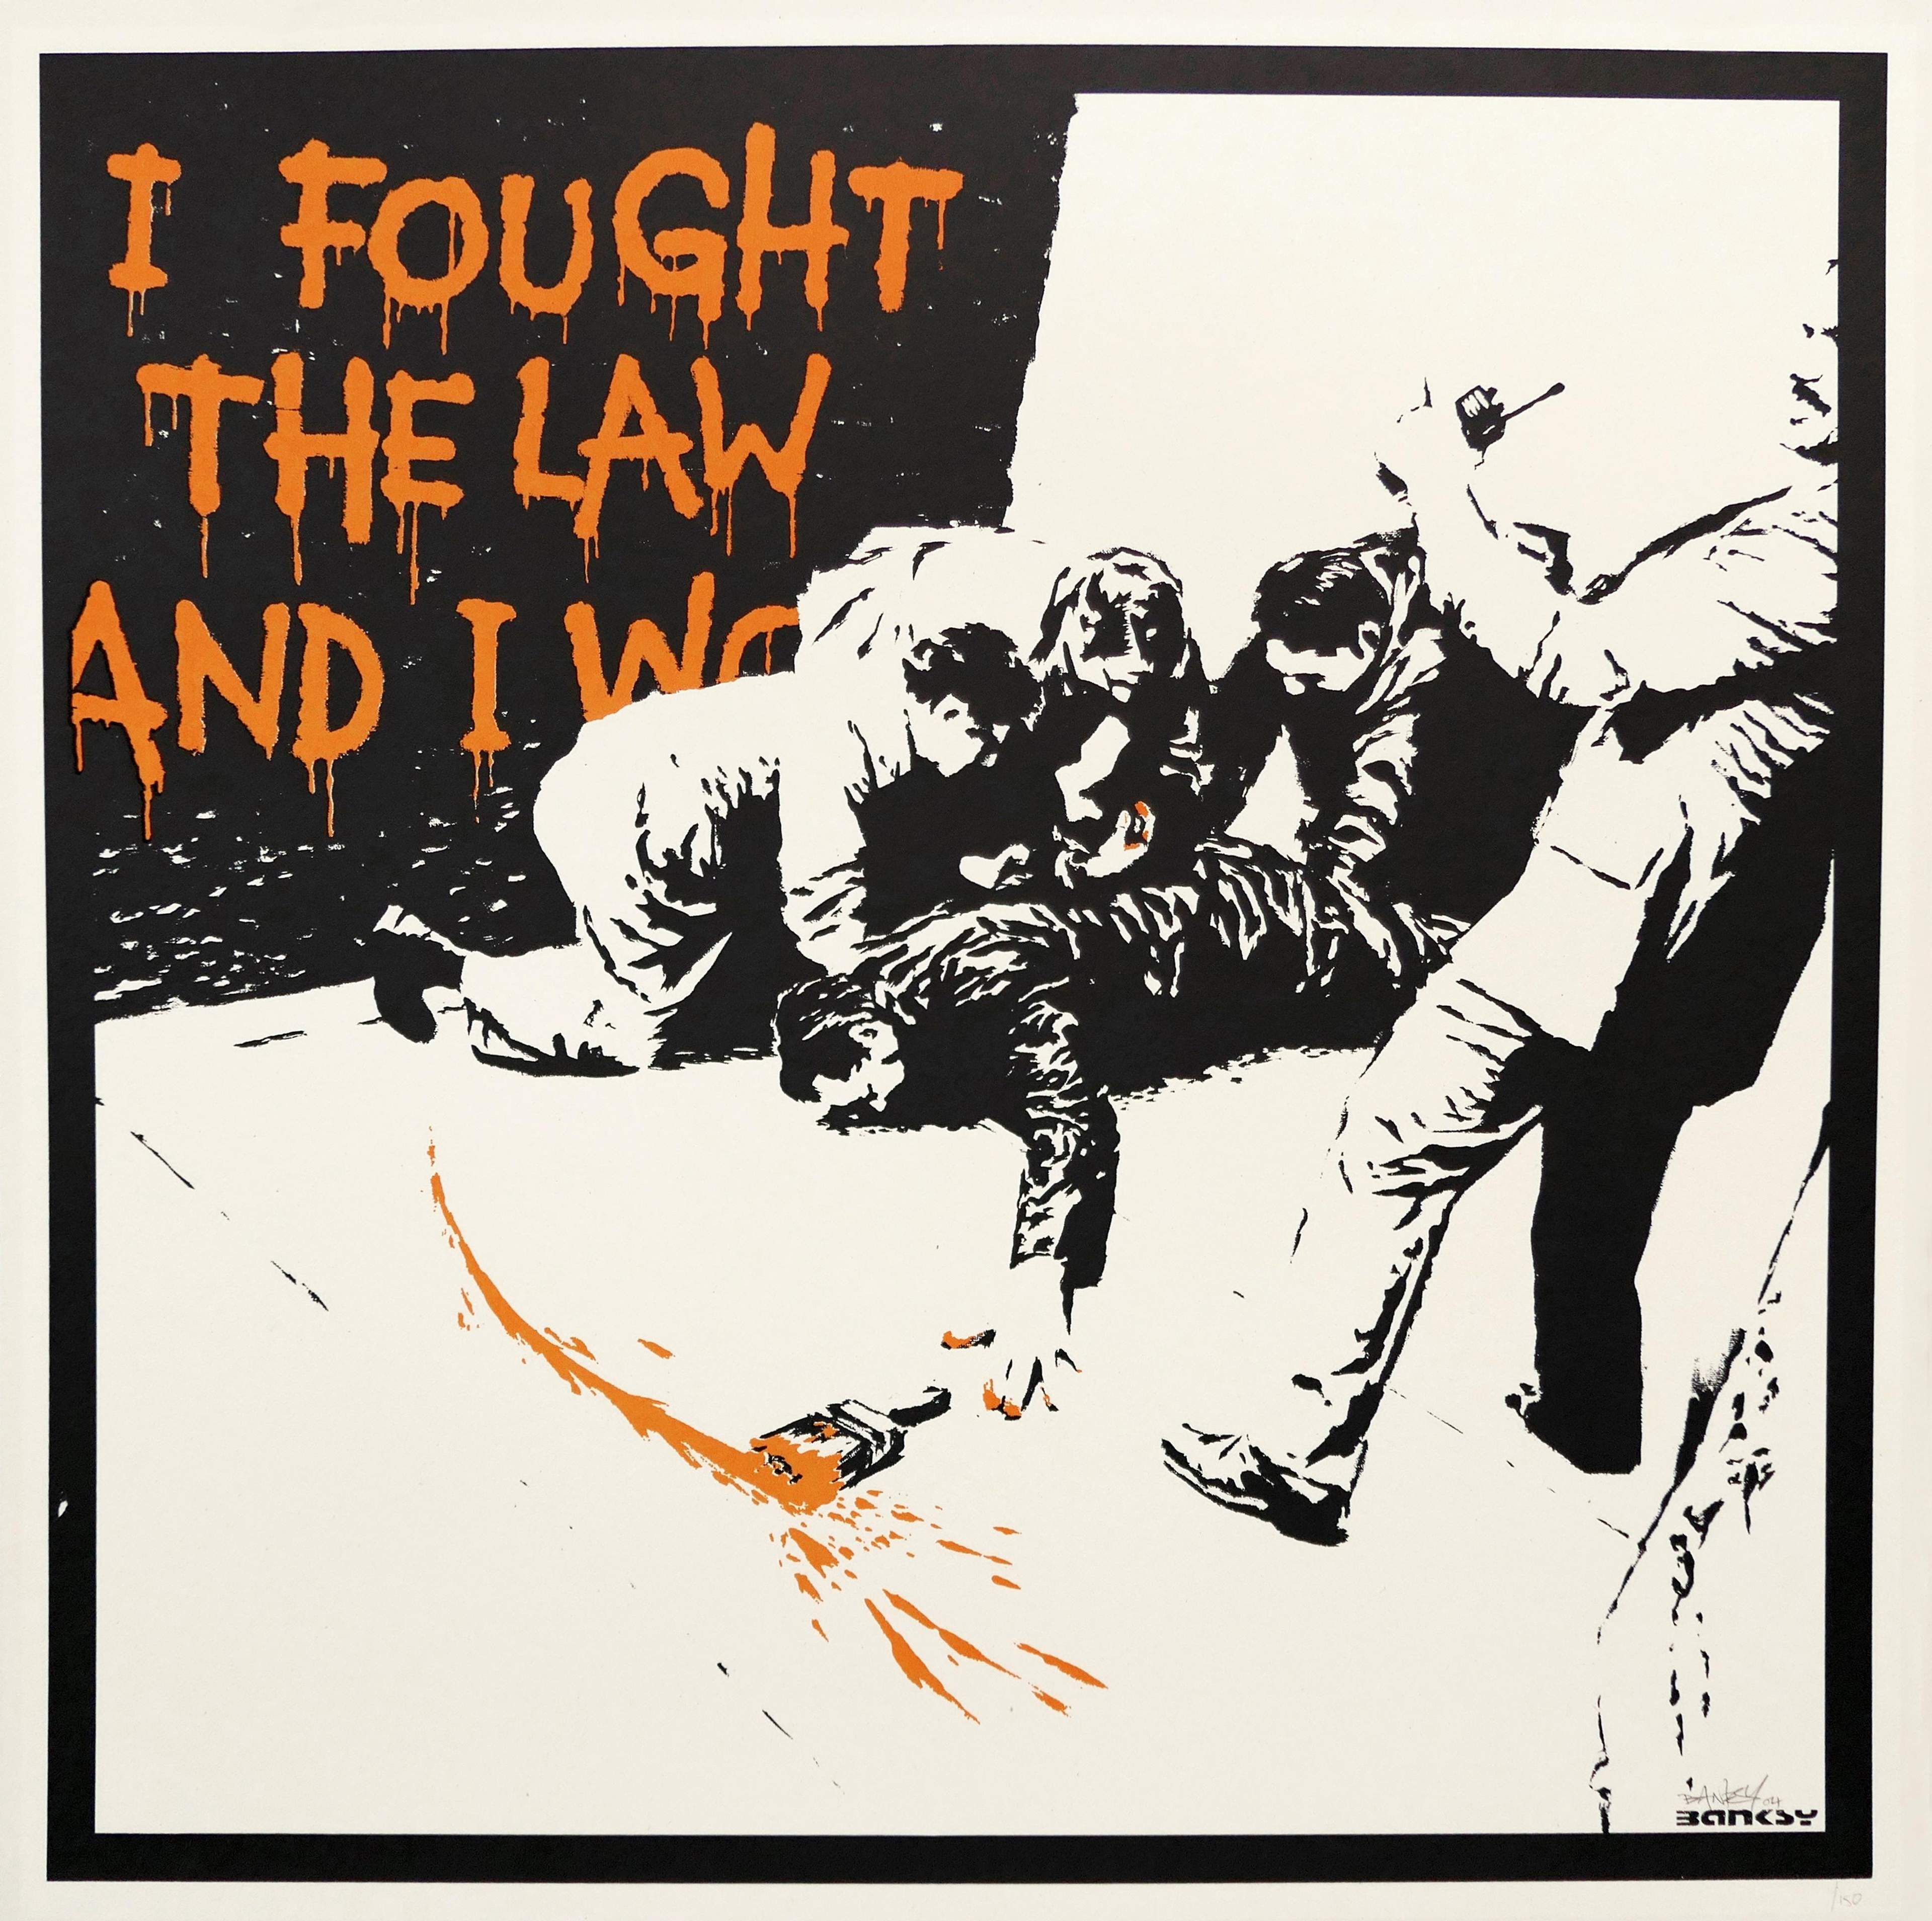 I Fought The Law by Bansky